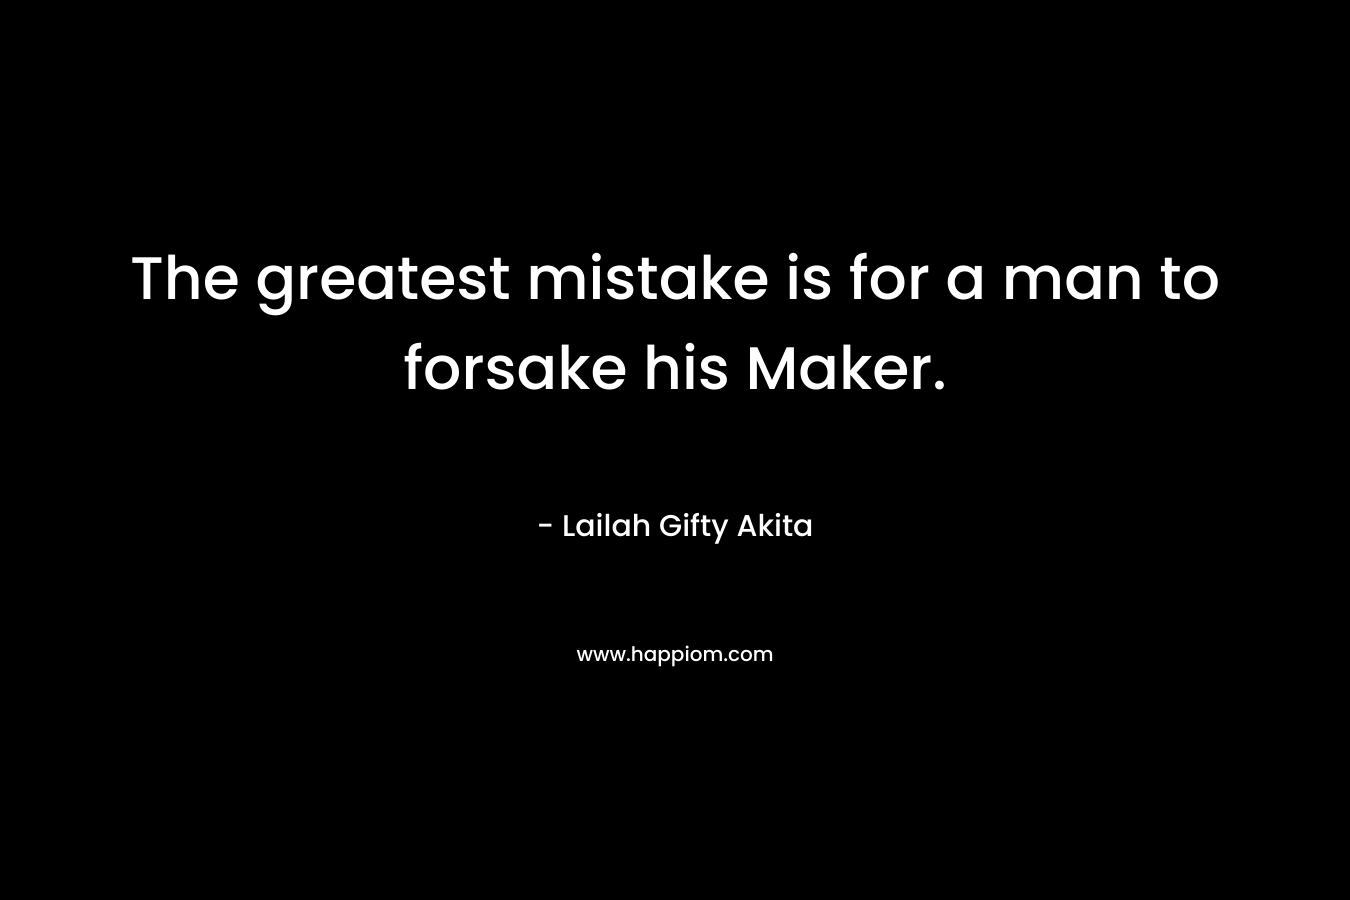 The greatest mistake is for a man to forsake his Maker. – Lailah Gifty Akita